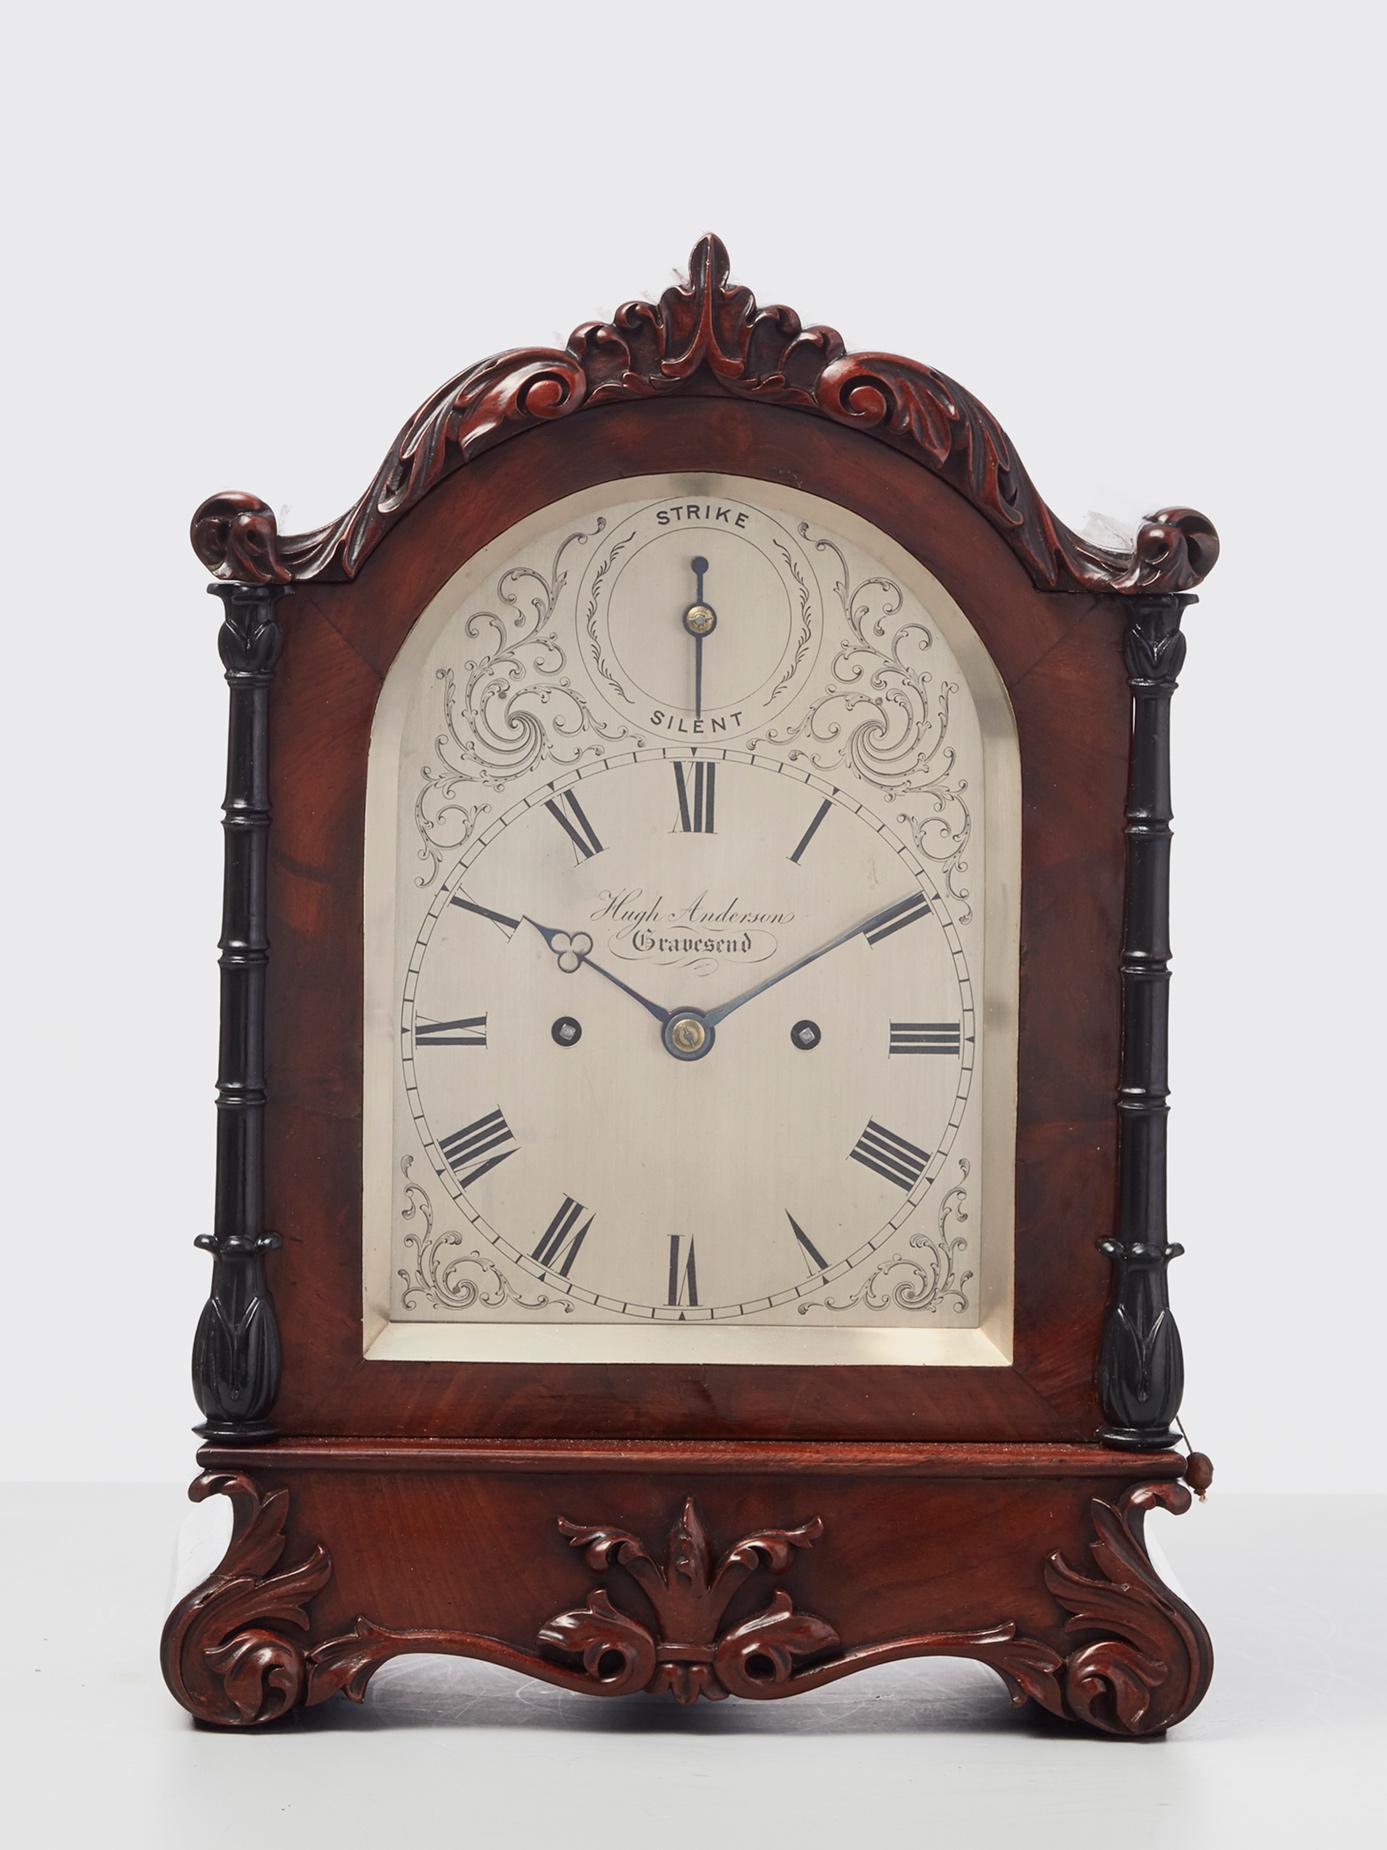 A beautiful striking Victorian bracket clock with an unusually attractive mahogany case, with good proportions and lovely detailed woodcarvings circa 1850.

The typical Victorian finely engraved silvered dial with Roman numerals, blued steel hands